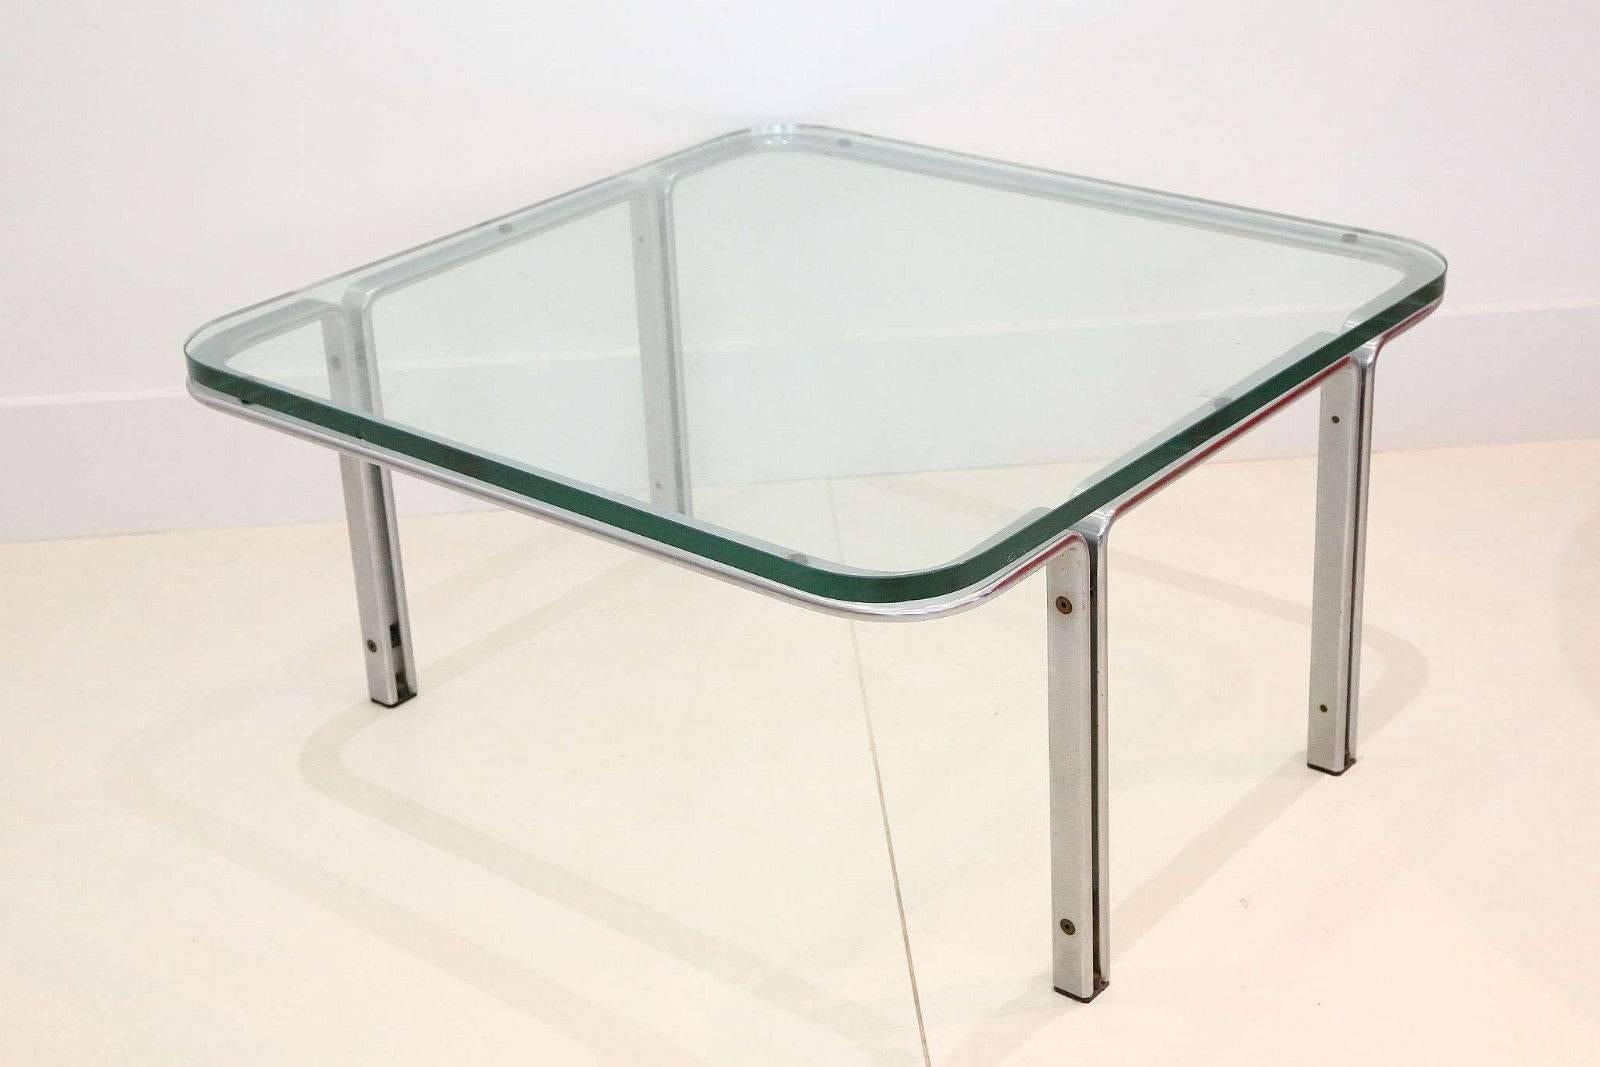 Mid-Century model T111 coffee table by Horst Bruning for Kill International

A 1960s German model T111 square steel and glass coffee table designed by Horst Bruning, with glass top, on flat steel base.

Horst Bruning studied architecture and